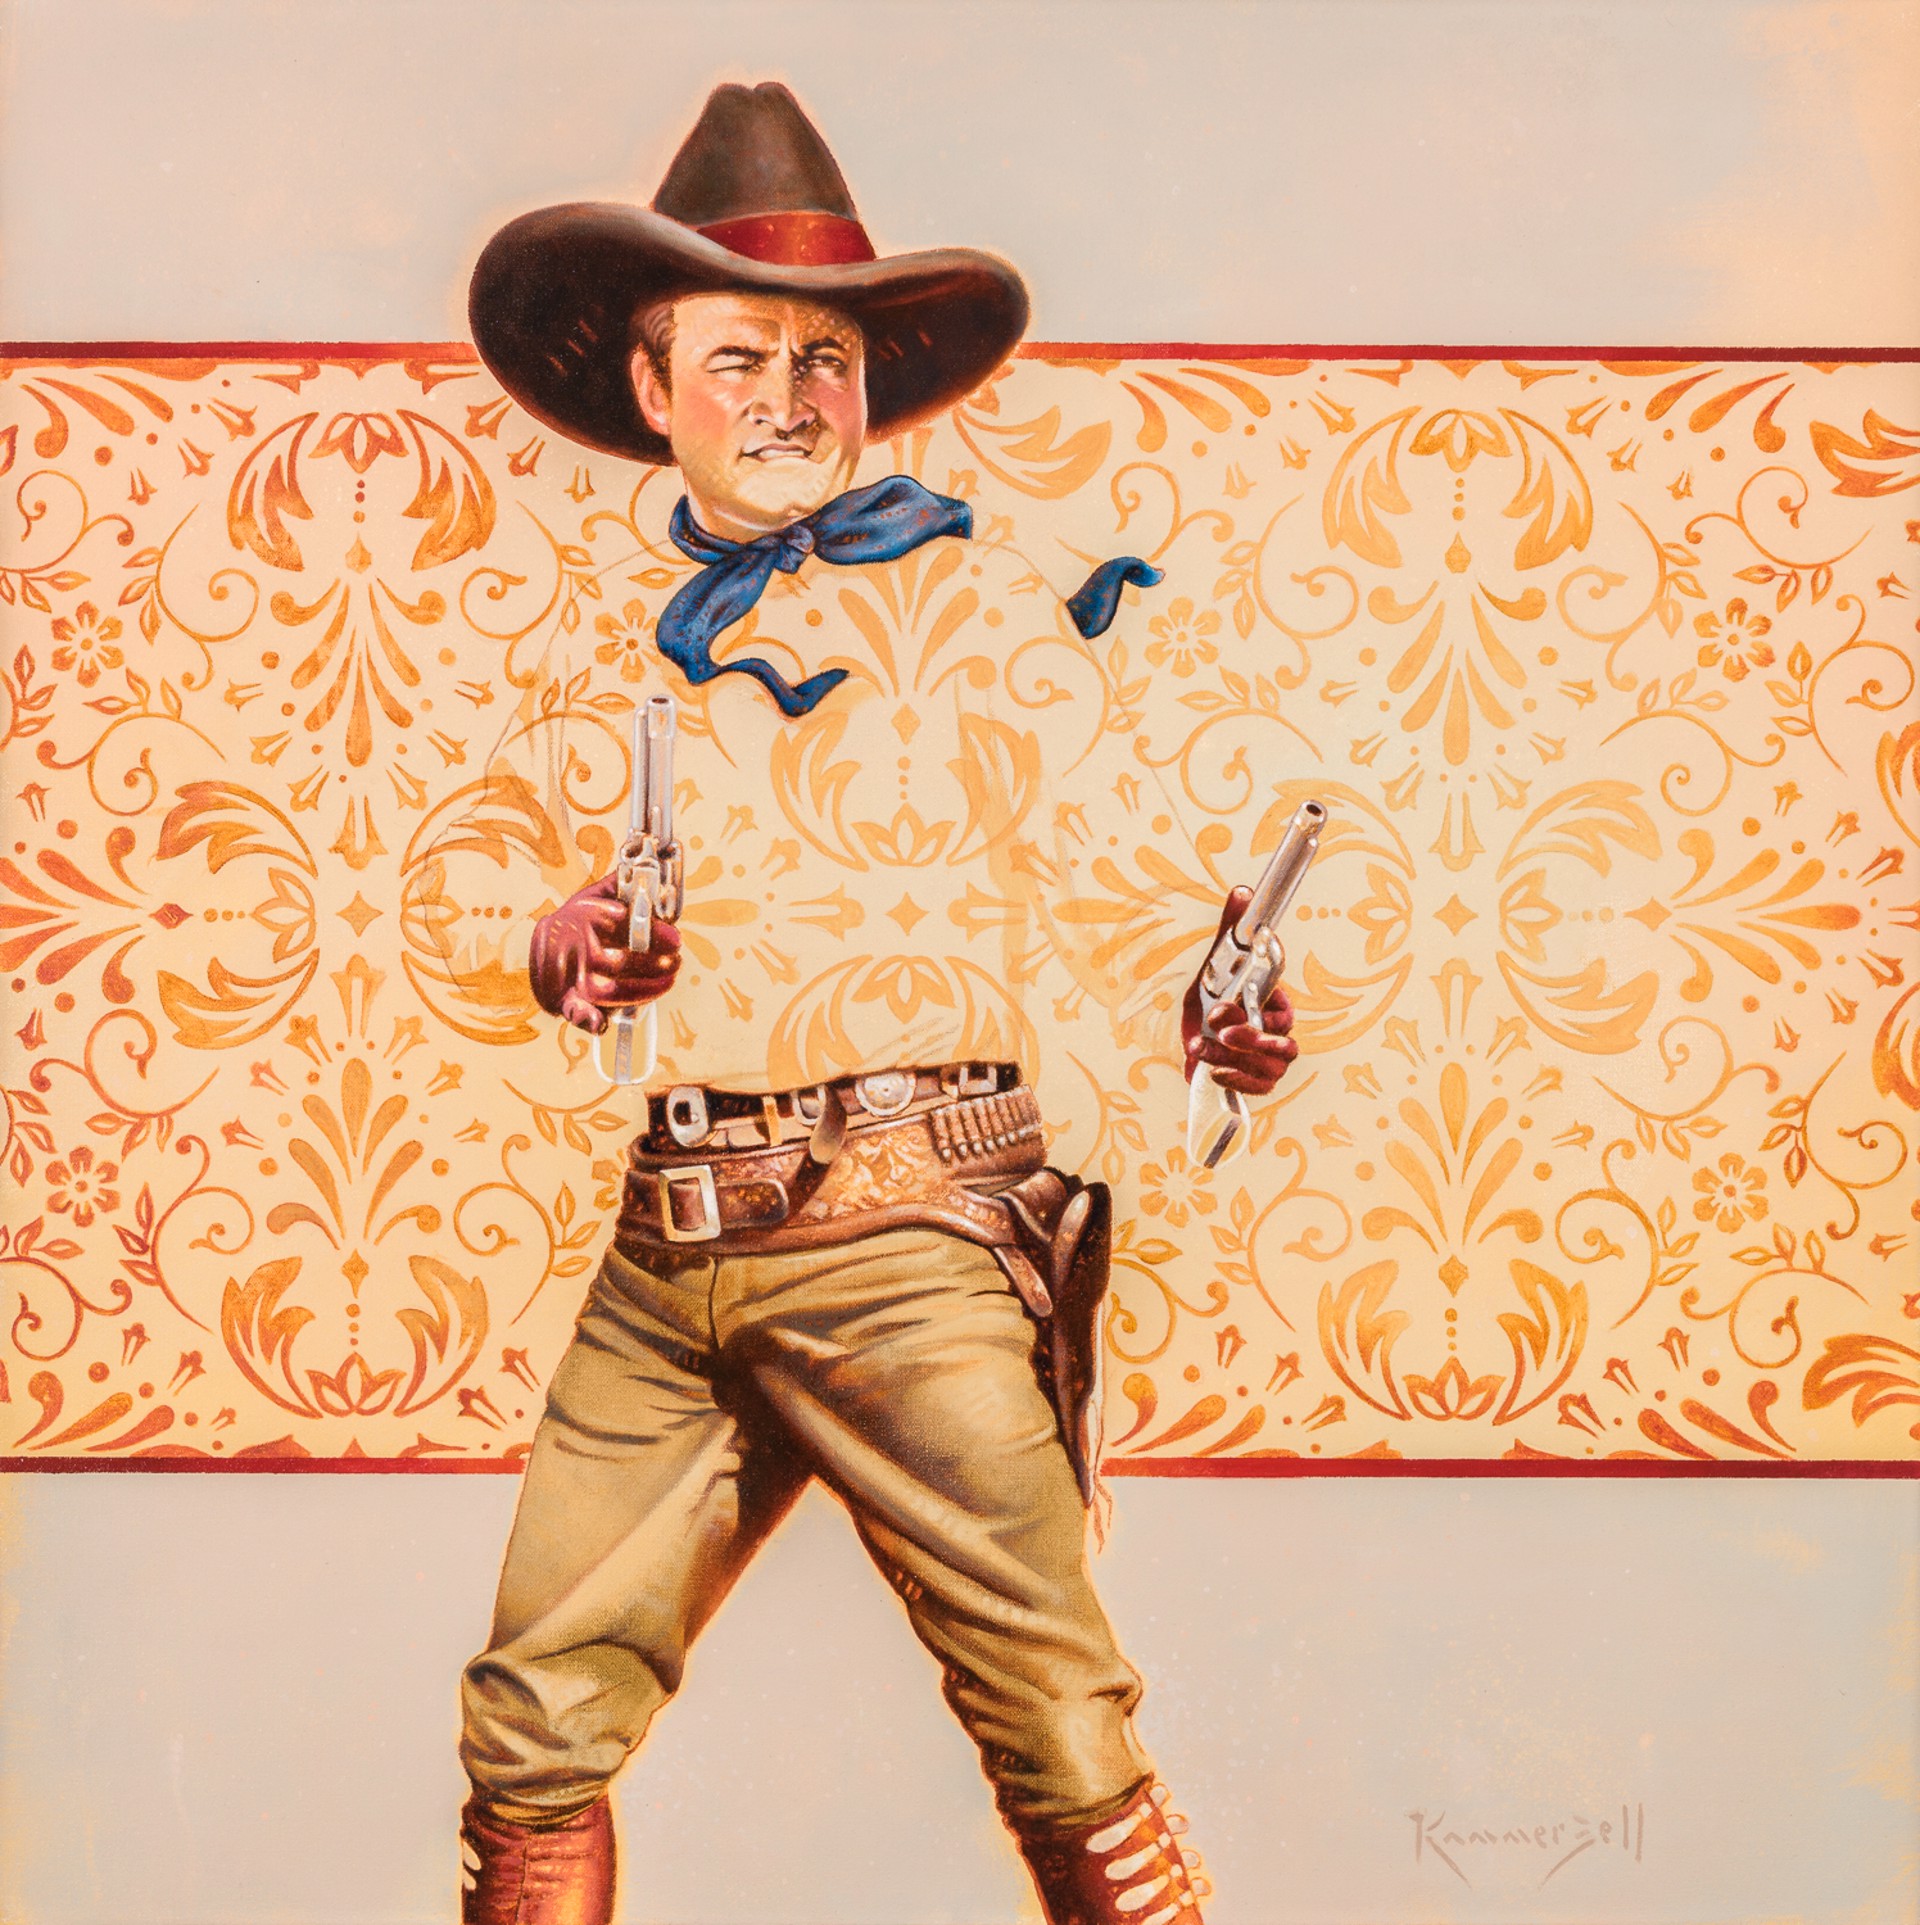 TOM MIX AND THE MISSING DOT by David Kammerzell